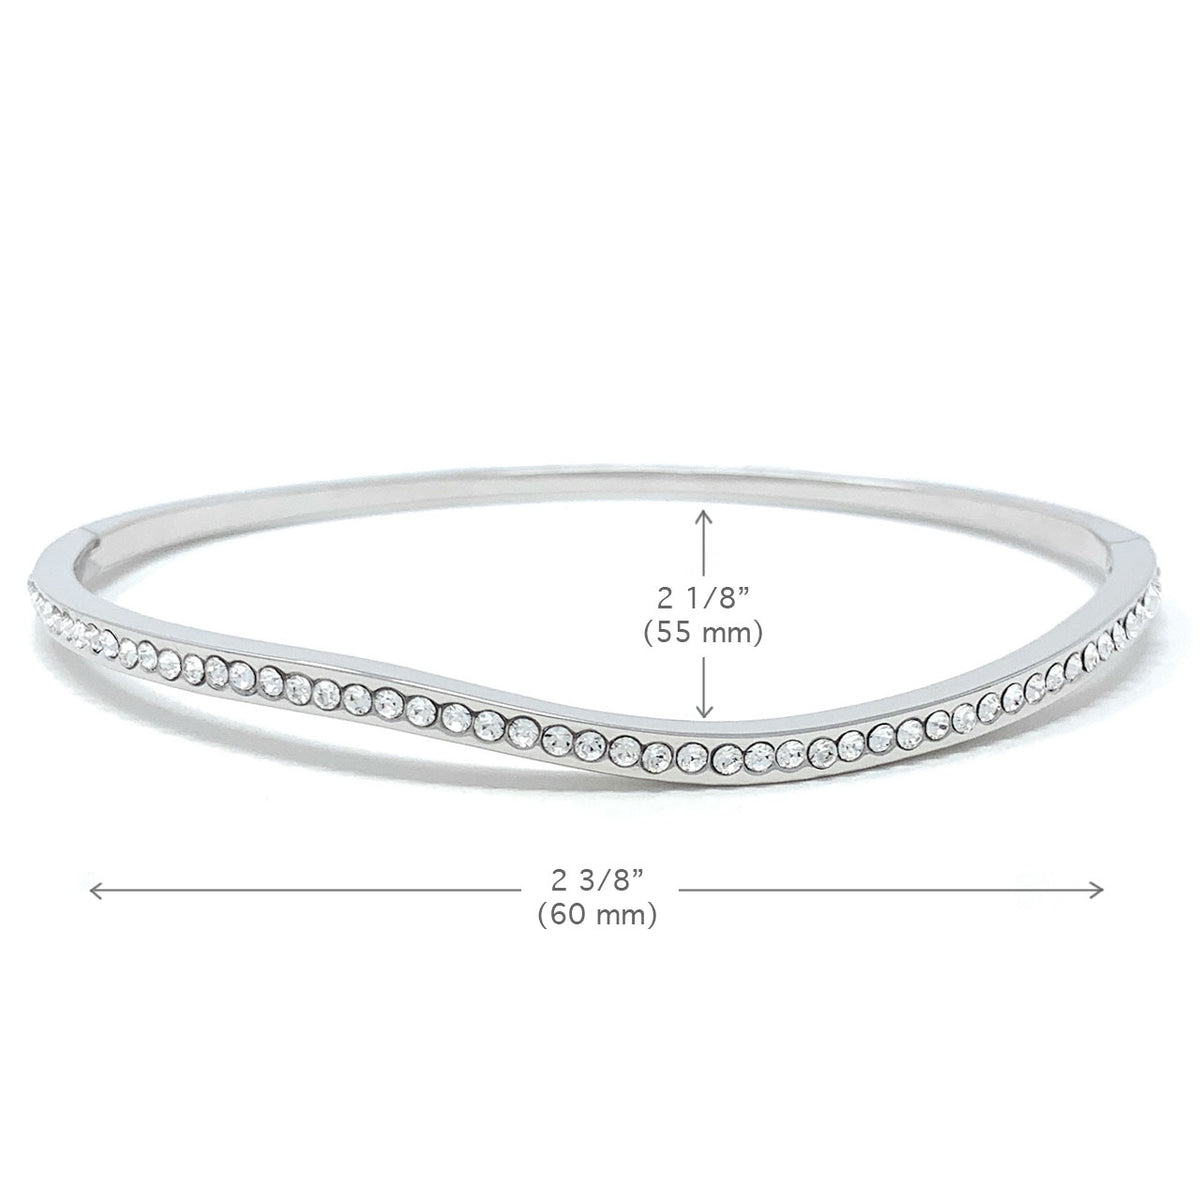 Amelia Curve Pave Bangle Bracelet with White Clear Round Crystals from Swarovski Silver Toned Rhodium Plated - Ed Heart